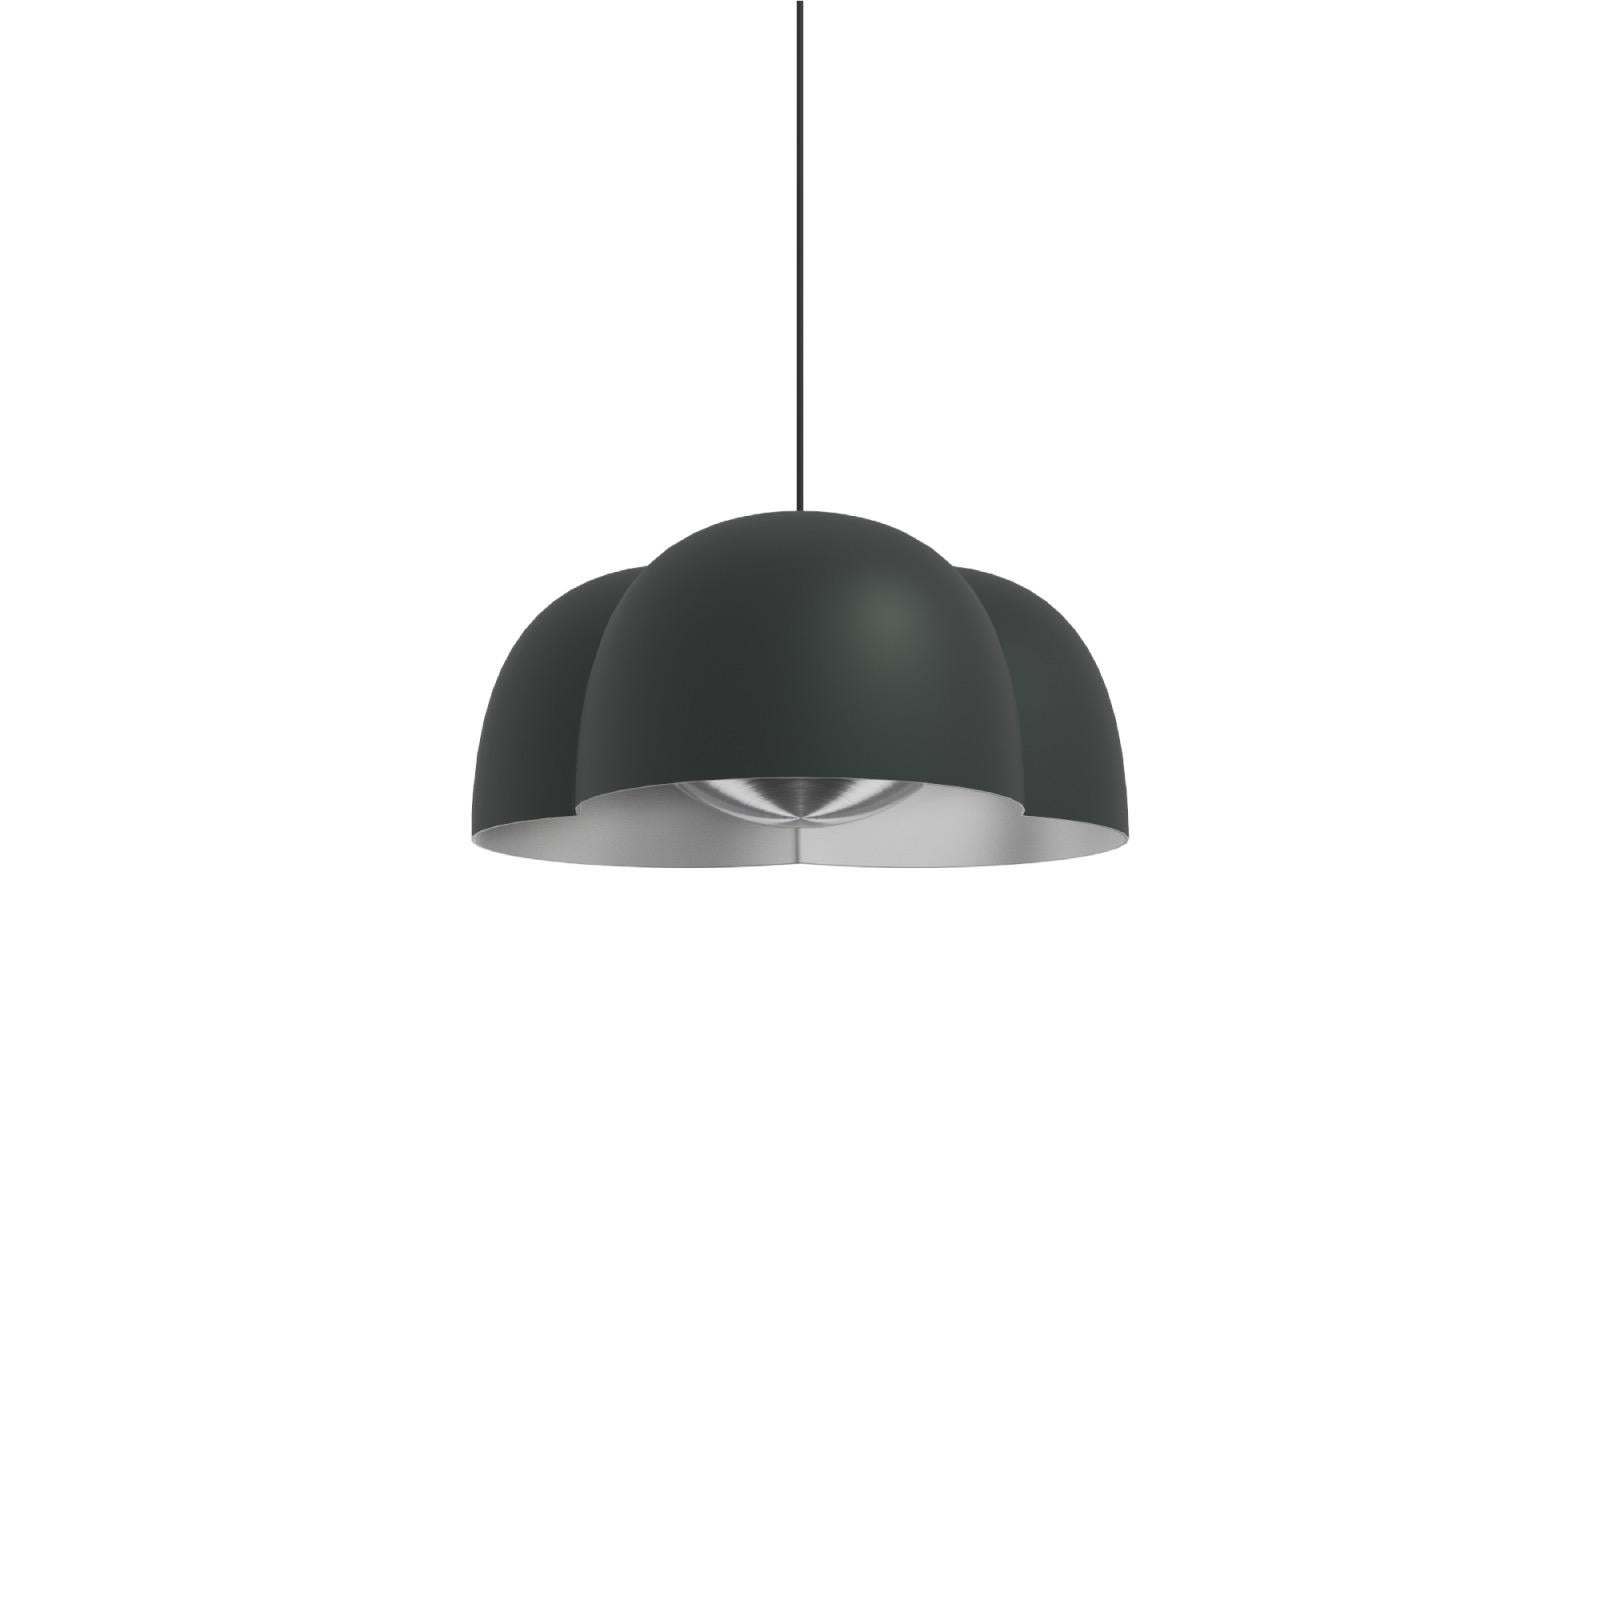 Contemporary Pendant Lamp 'Cotton' by Sebastian Herkner x Ago, Large - Charcoal  For Sale 1